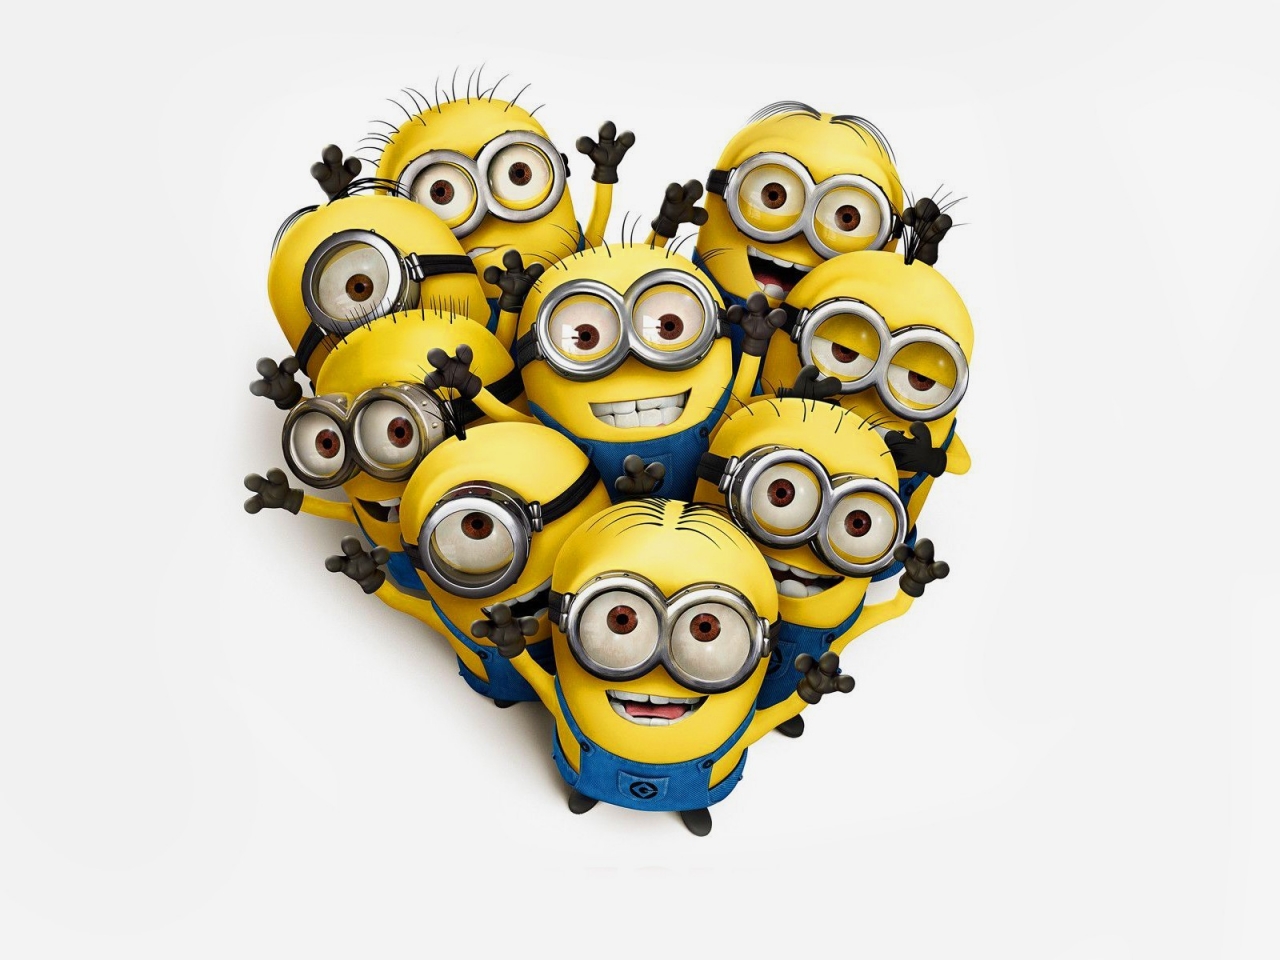 Despicable Me Film Poster for 1280 x 960 resolution